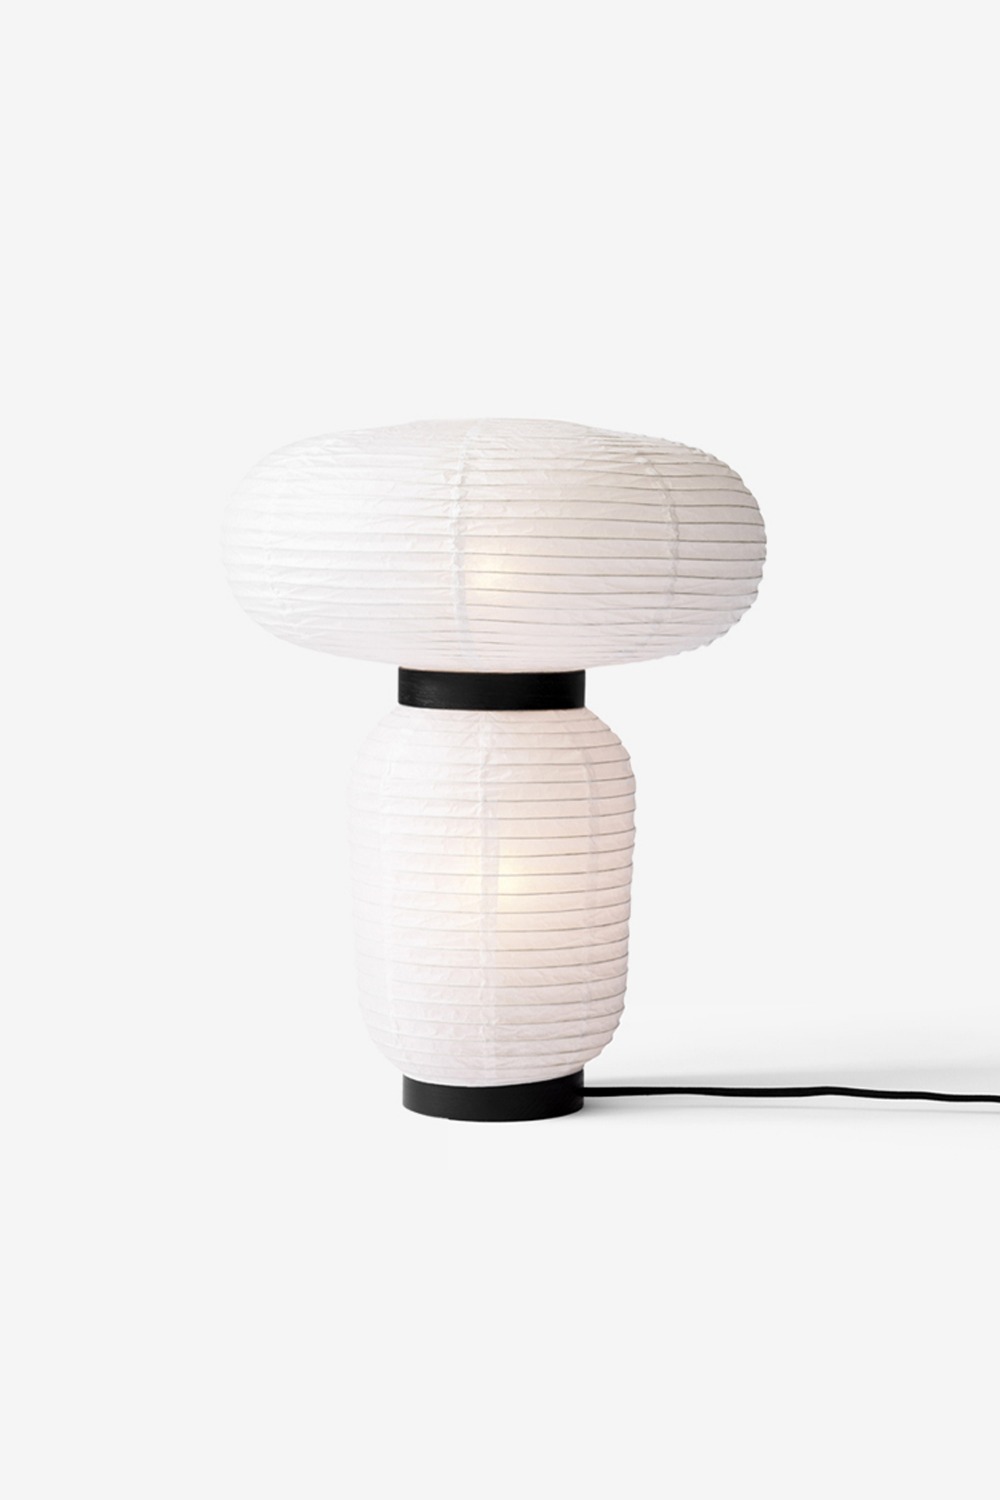 [Andtradition] Formakami Table Lamp /JH18